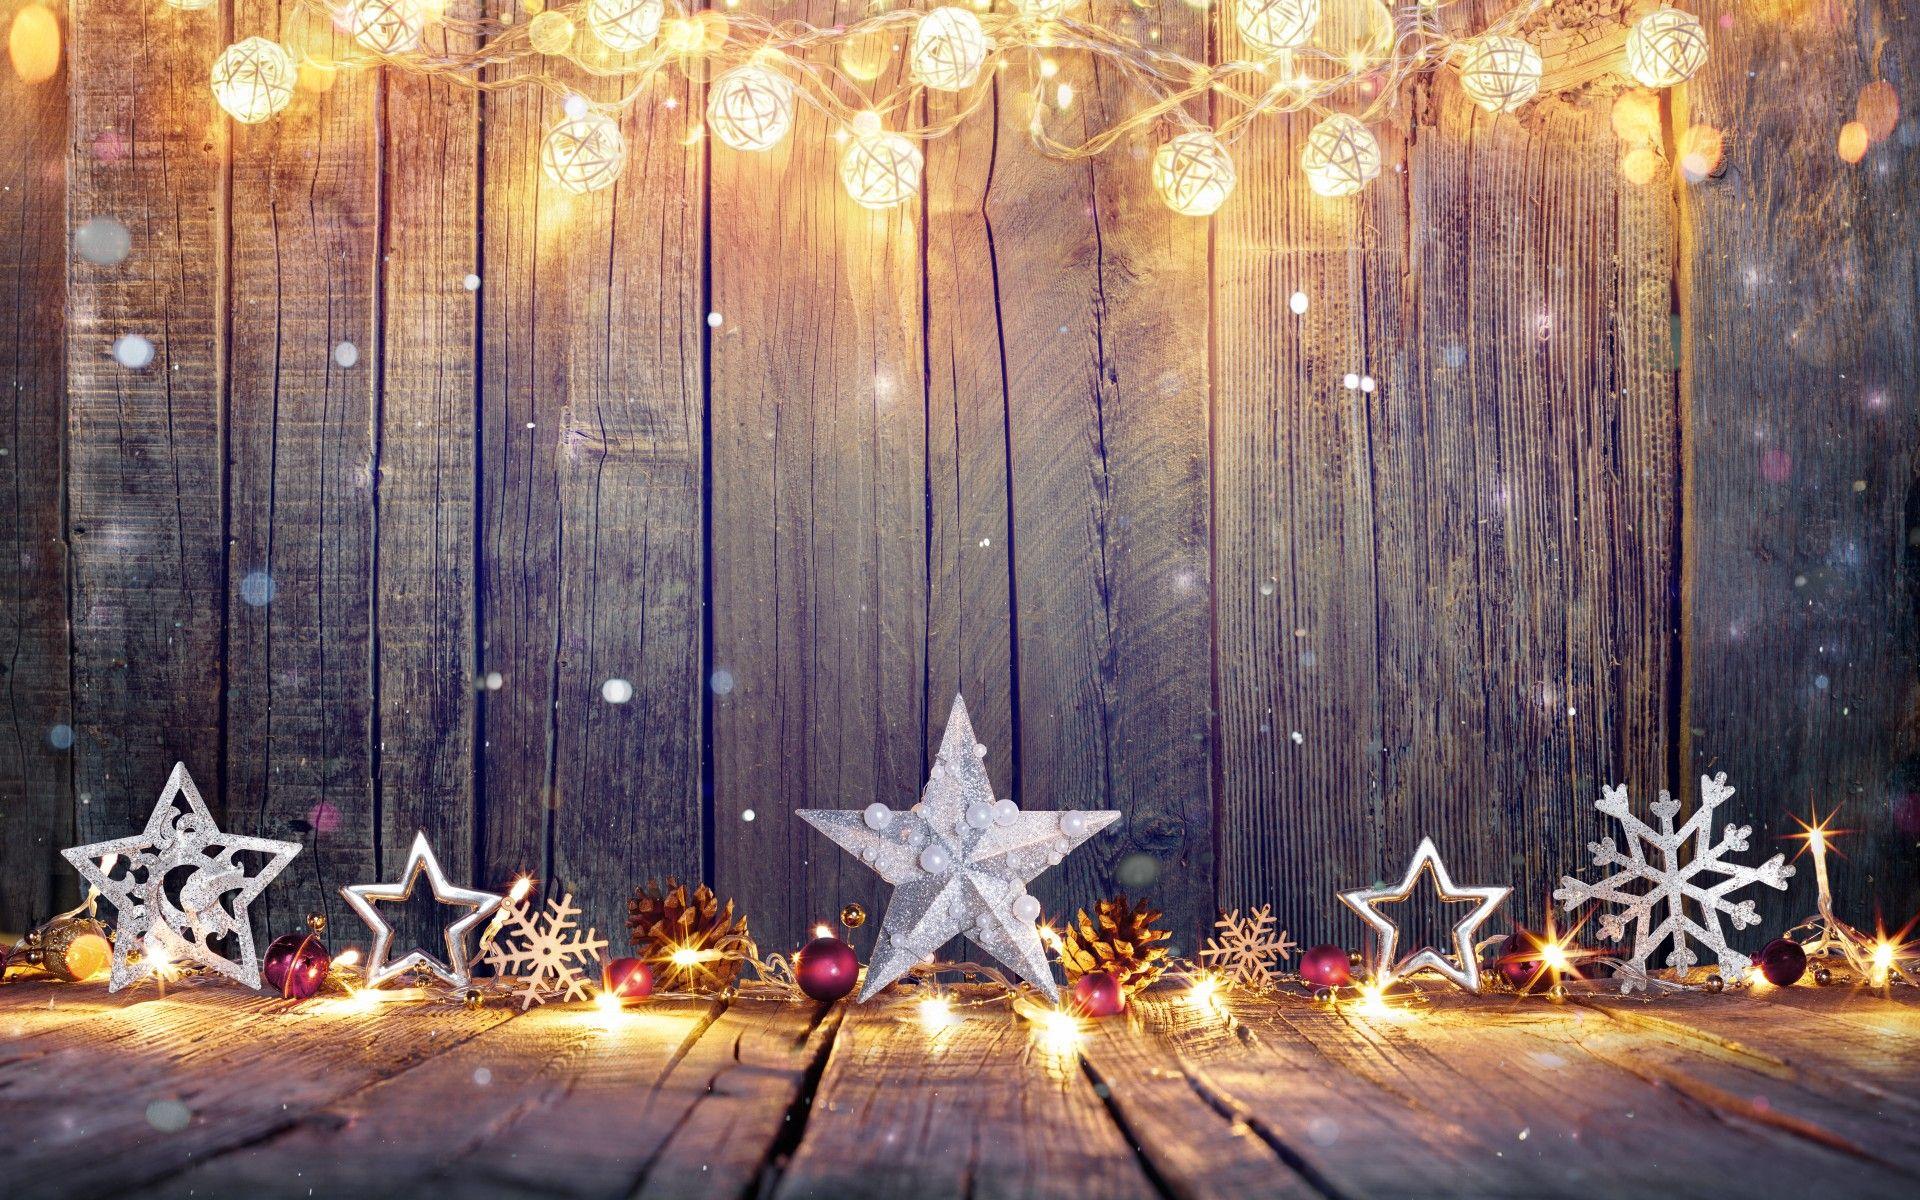 Download 1920x1200 Christmas Decorations, Lights, Holiday Wallpaper